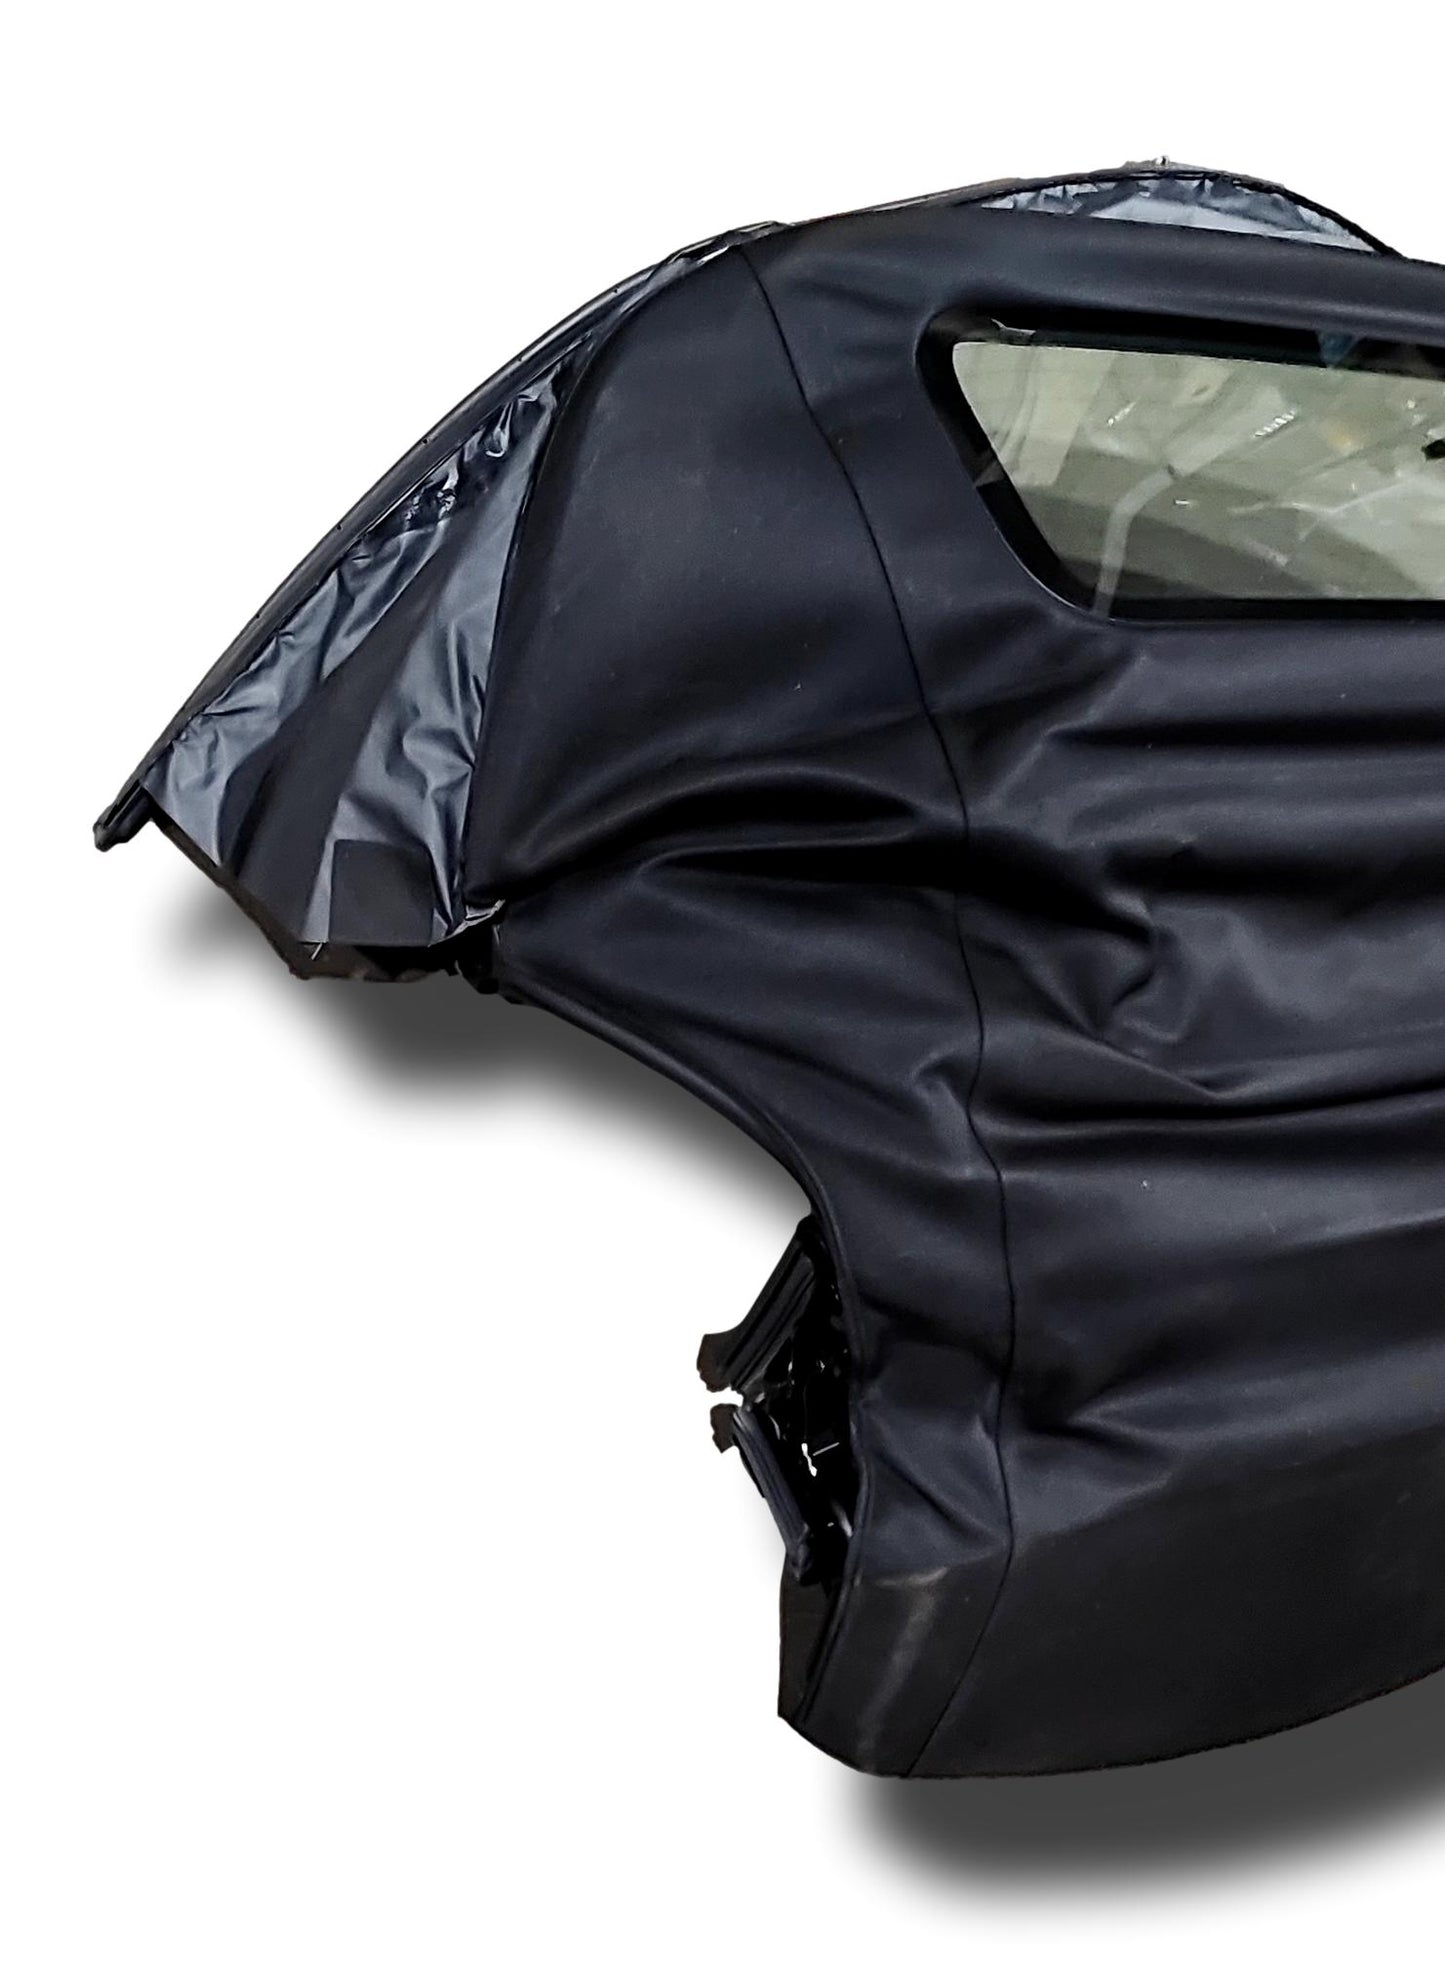 Genuine New Jaguar F Type Convertible Roof Cover Black T2R12370 T2R12669YUF